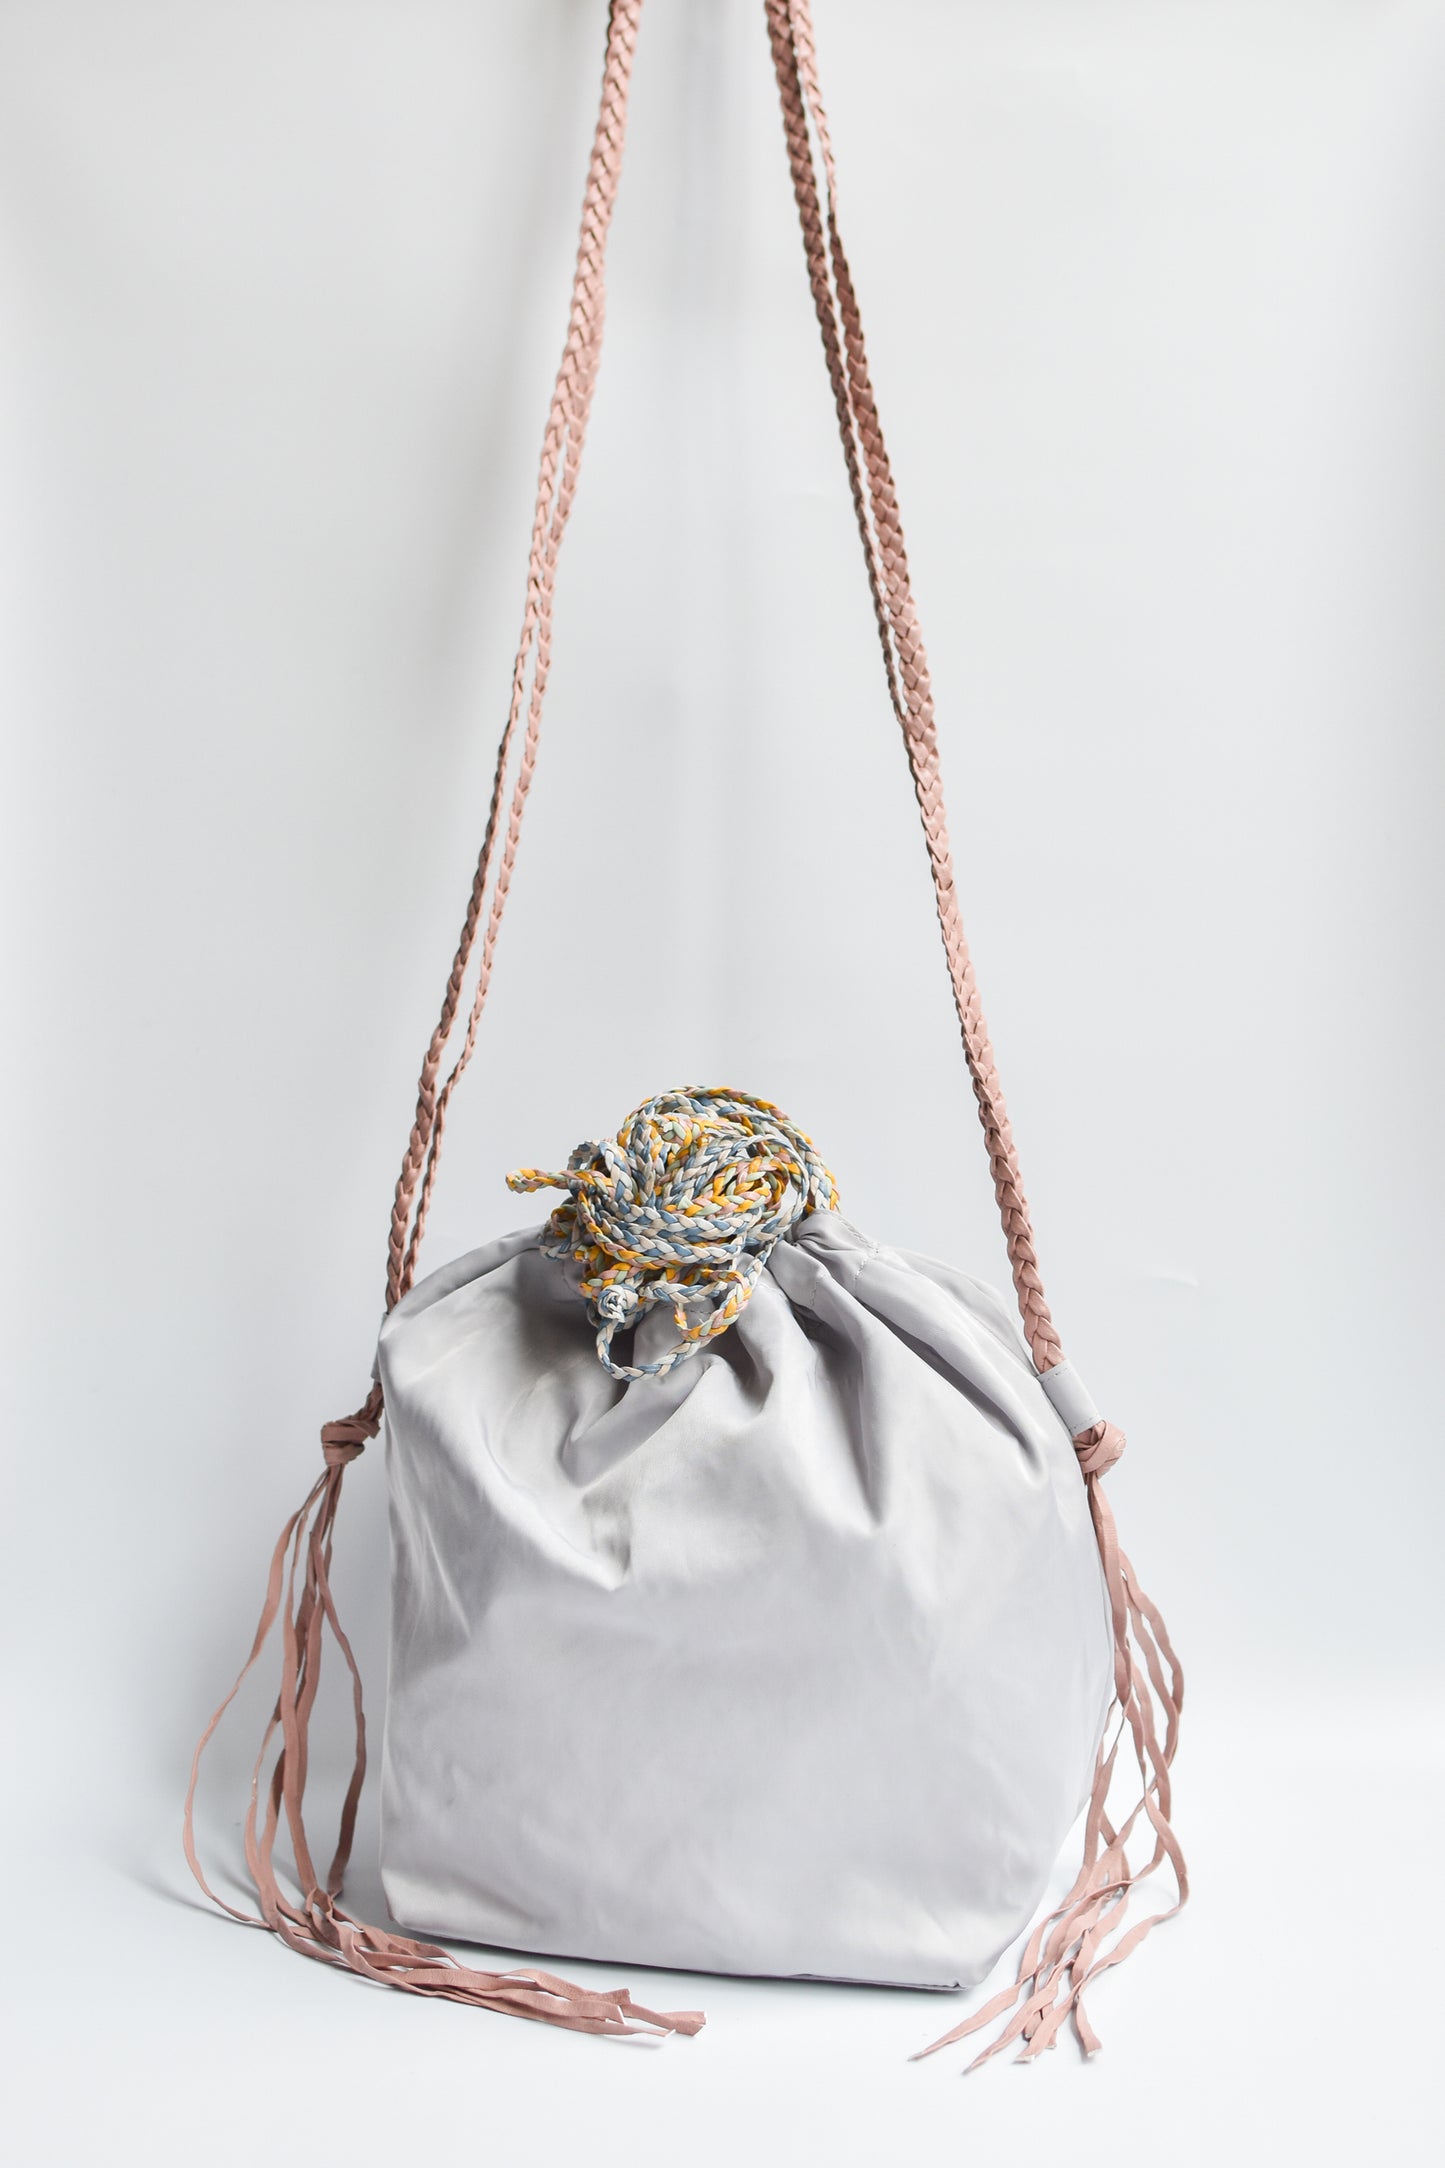 Sporty gray nylon cinch bag with colorful braided leather straps. 